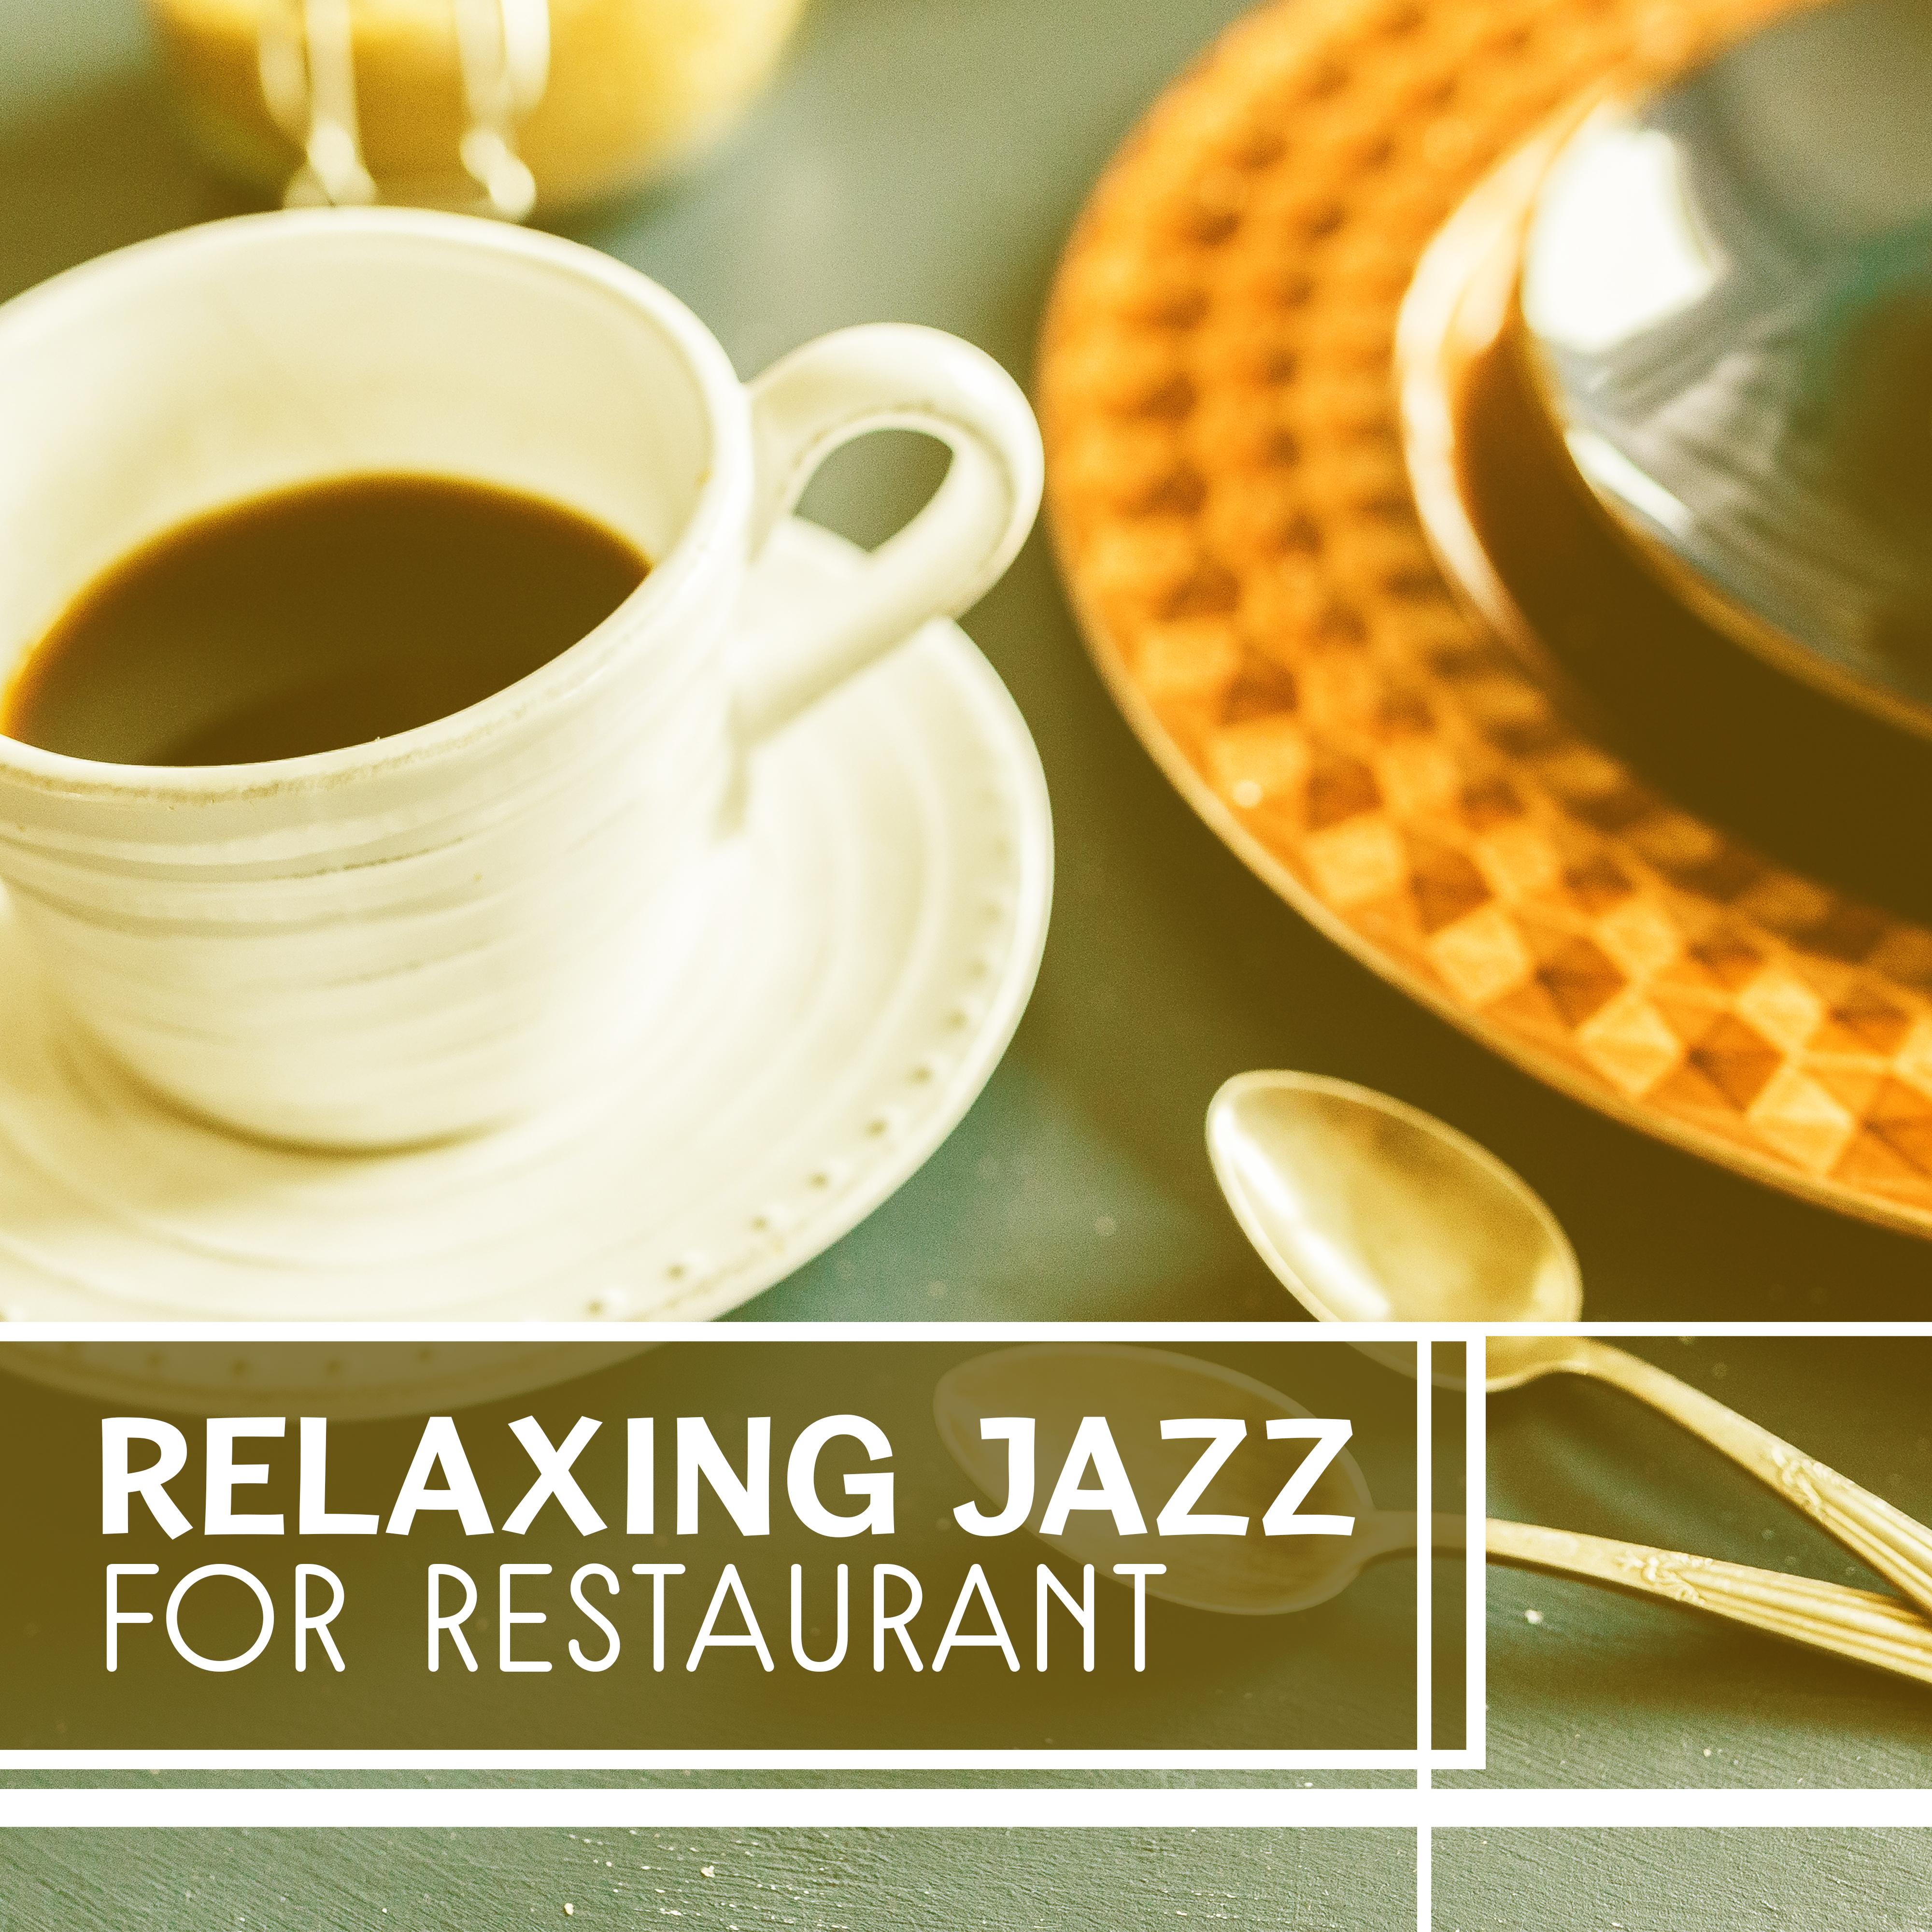 Relaxing Jazz for Restaurant  Smooth Jazz Sounds, Rest with Jazz, Calmness Piano Jazz, Easy Listening